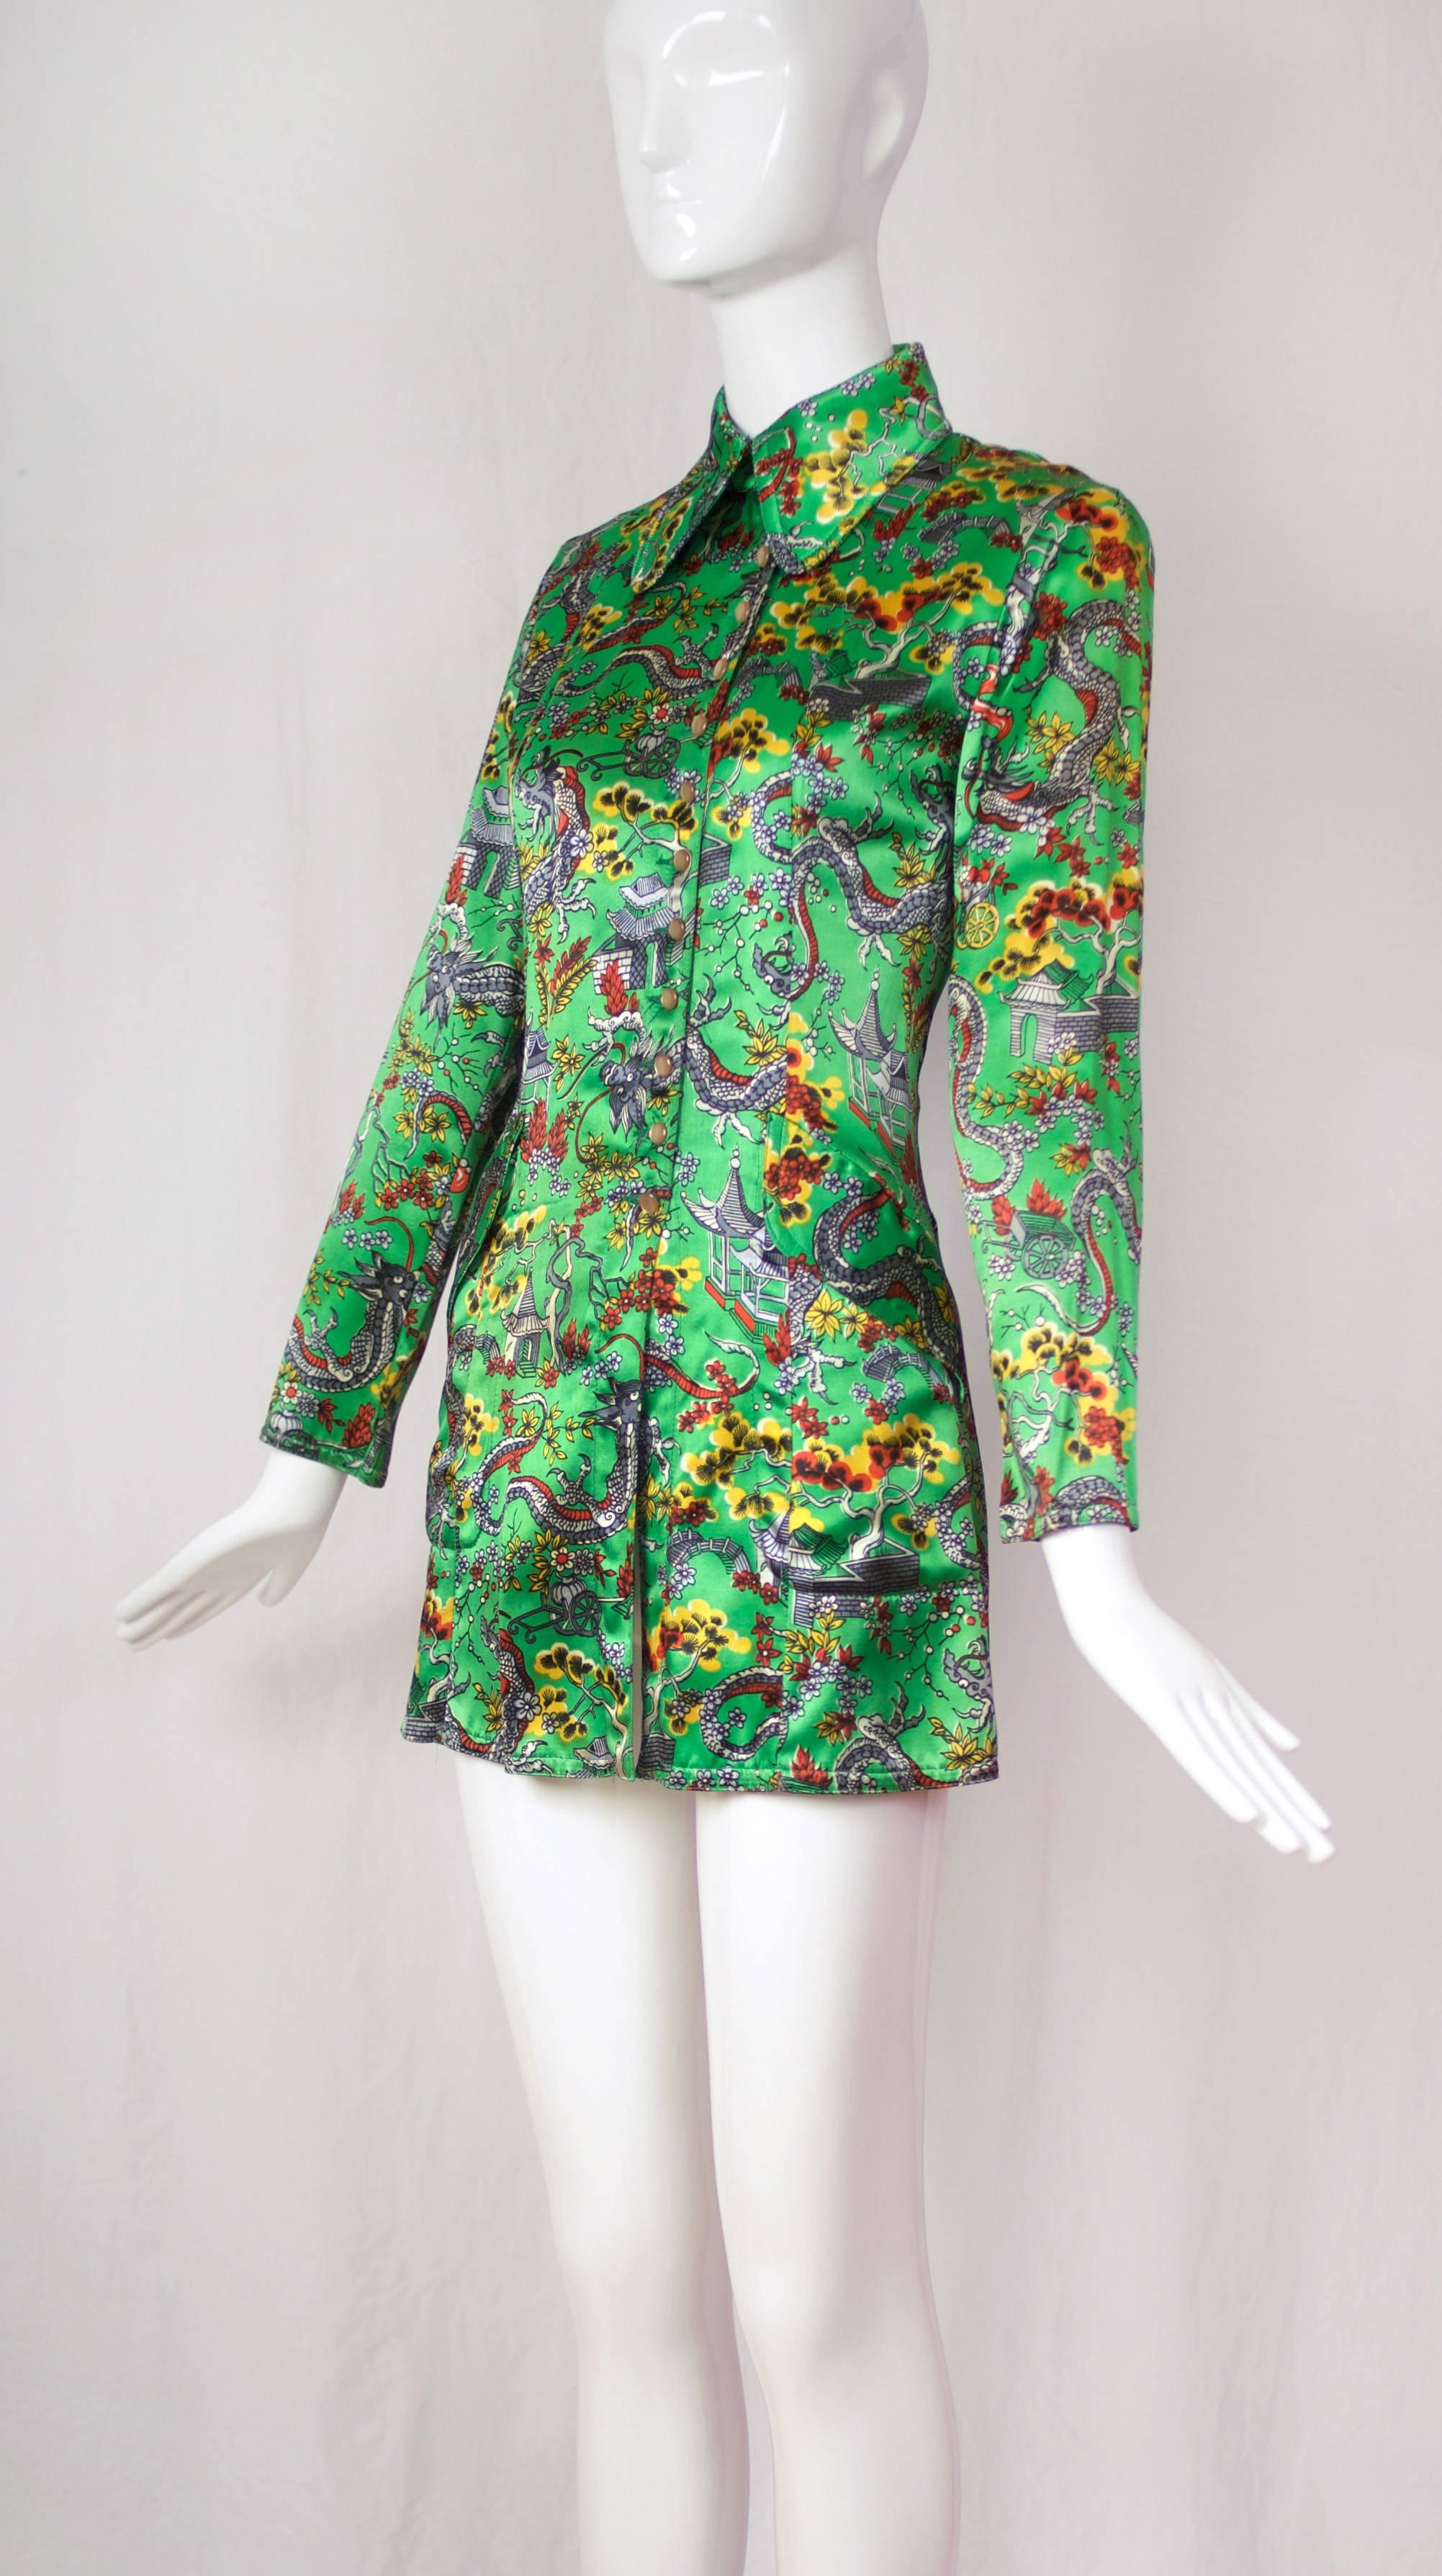 A circa 1967/1968 Ossie Clark satin rayon long jacket/tunic in green, red, yellow and gray with dragon-themed Chinoiserie print. The jacket has a structured fit with high arm holes, frontal pockets, pearlescent buttons that fasten off-center up the